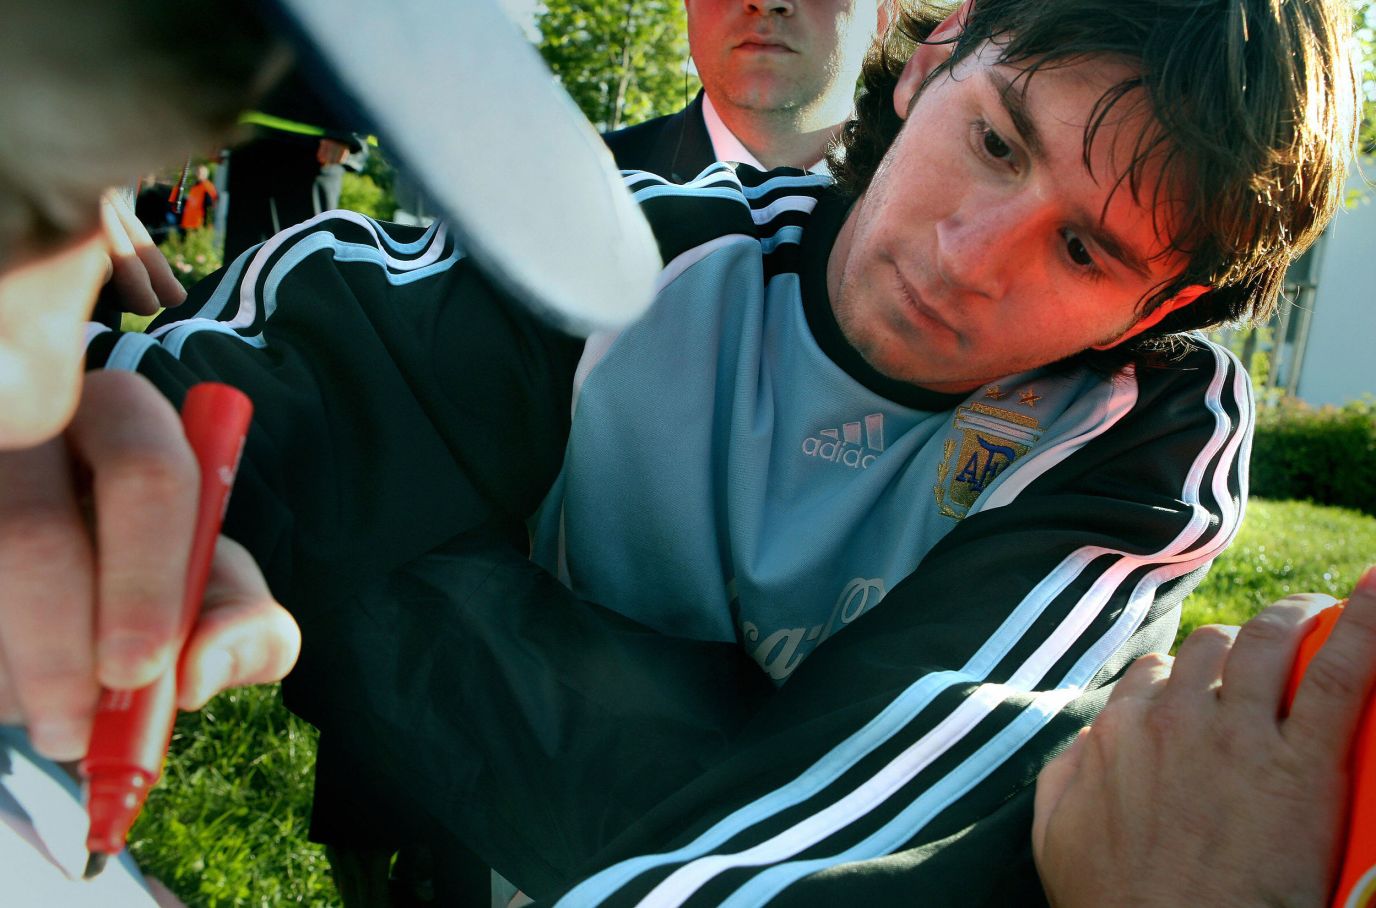 Messi signs autographs while training ahead of the World Cup in Gerмany in June 2006.